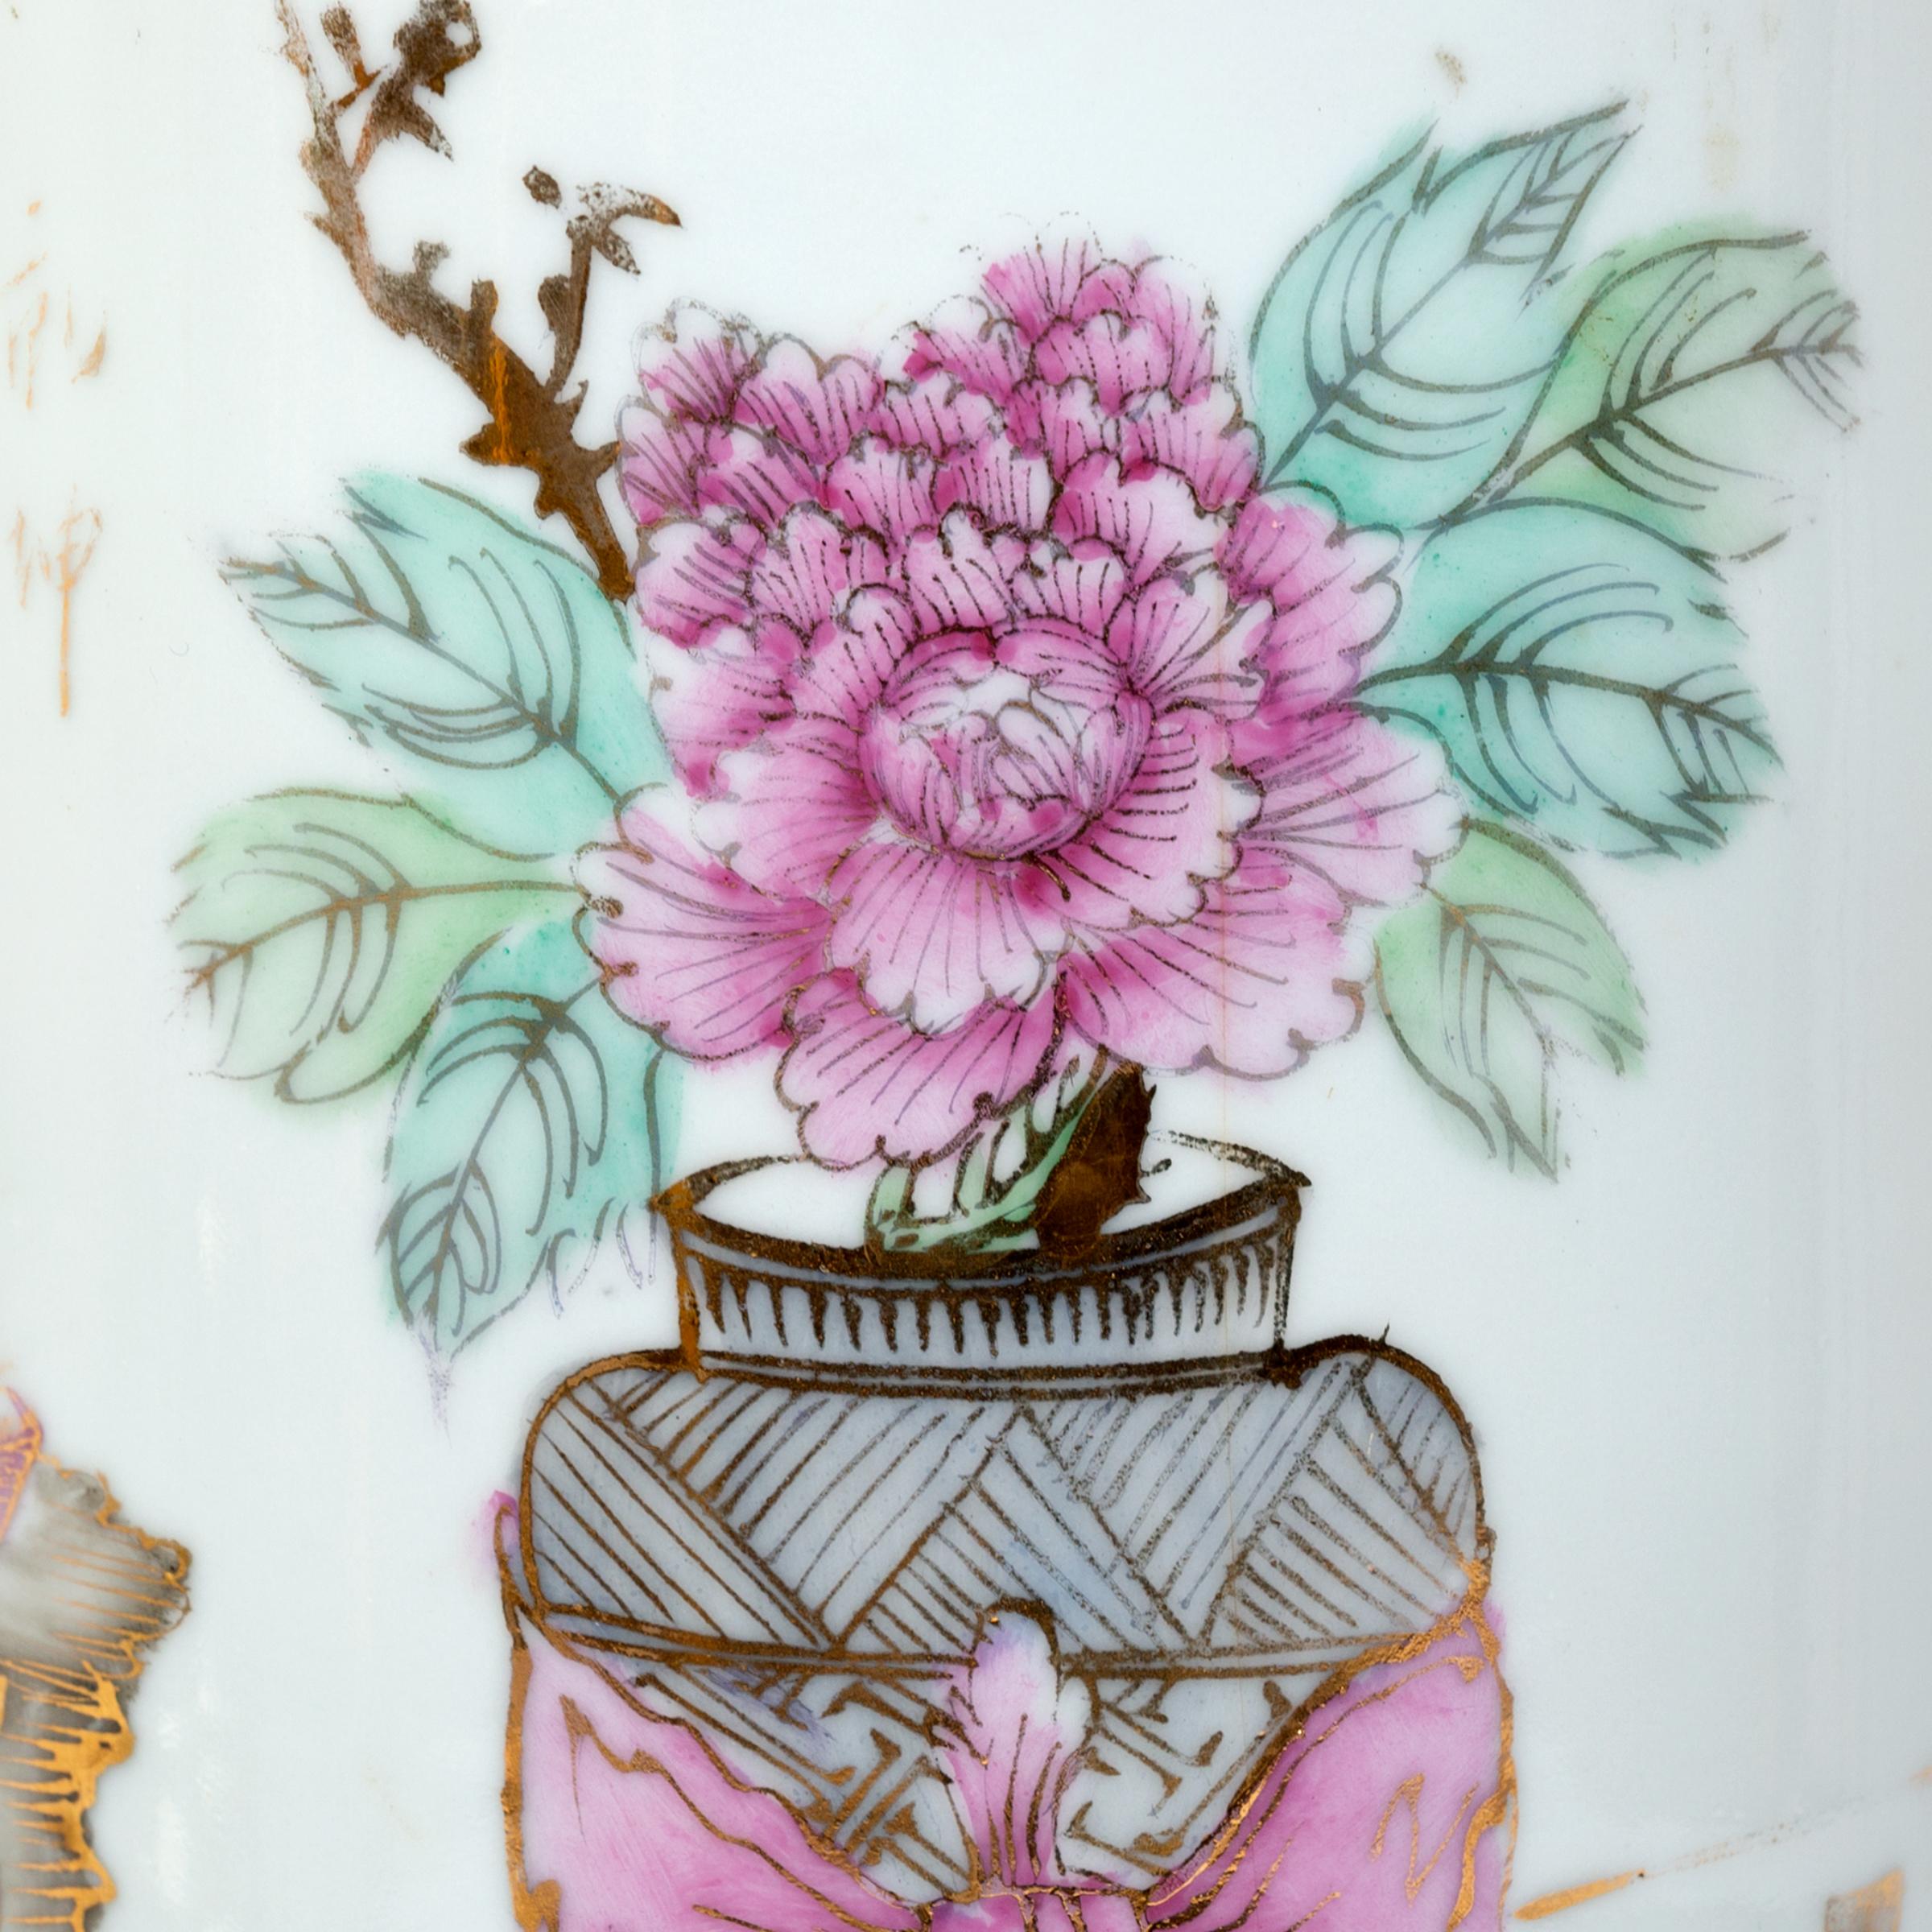 Adorned with the prized collection of a Qing-dynasty scholar, this straight, cylindrical vase is decorated with an array of treasured items. Beautifully painted with a skilled hand, the porcelain vase celebrates the springtime with a lush peony